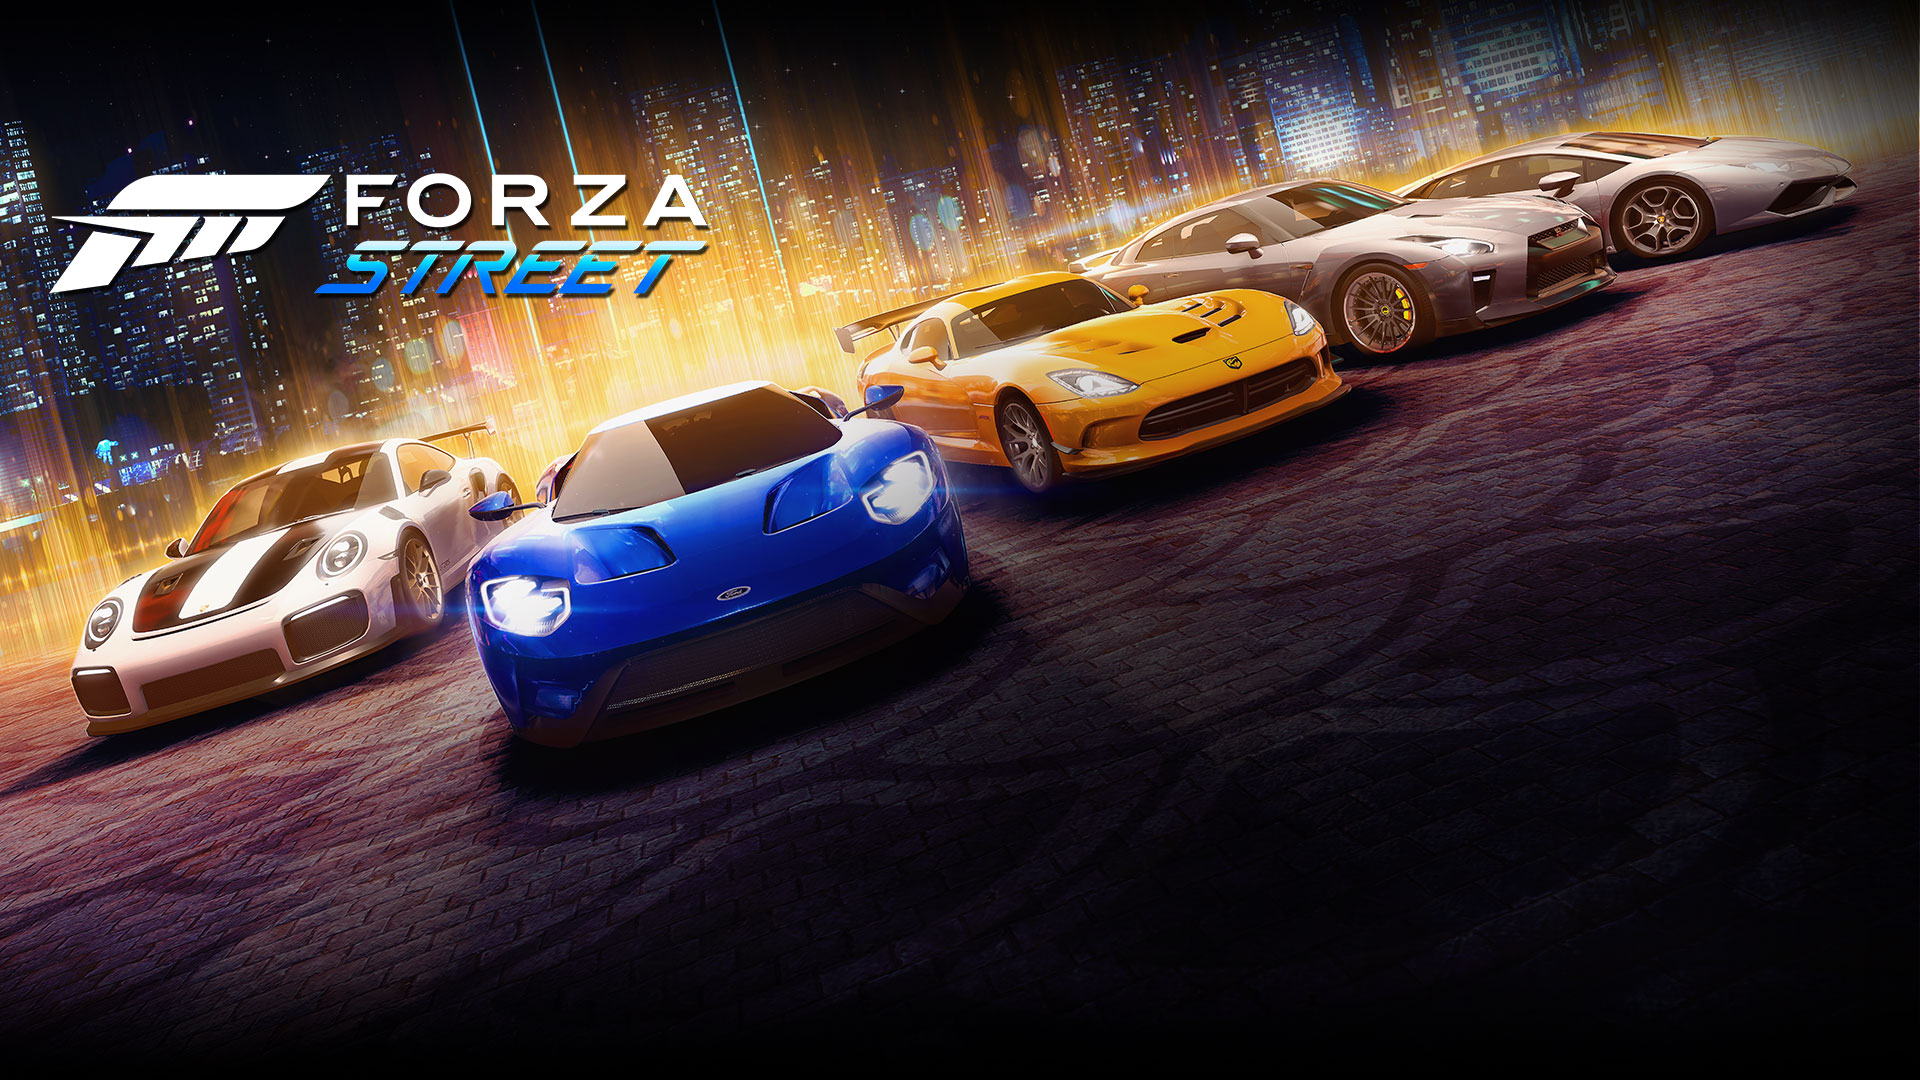 Forza Street, lineup of legendary cars in the background